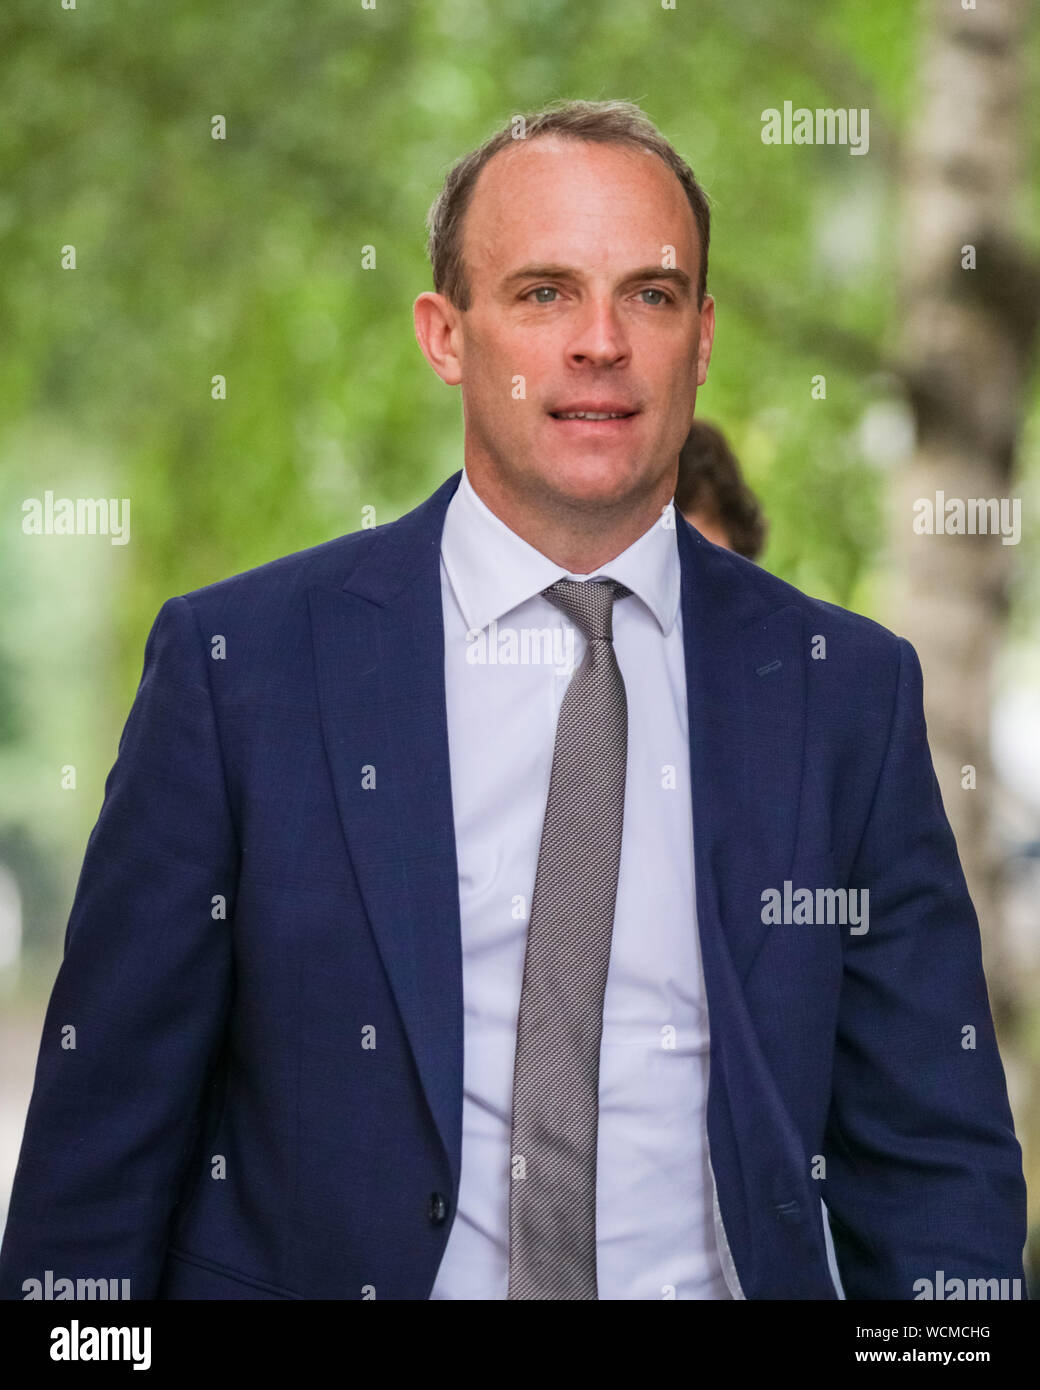 Westminster, London, UK. 28th August 2019. Dominic Raab, MP, Secretary of State for Foreign and Commonwealth Affairs, walks along Downing Street and enters No10. PM Boris Johnson's government has today officially asked the Queen to approve the prorogation of Parliament for 1 month, starting in September. Credit: Imageplotter/Alamy Live News Stock Photo